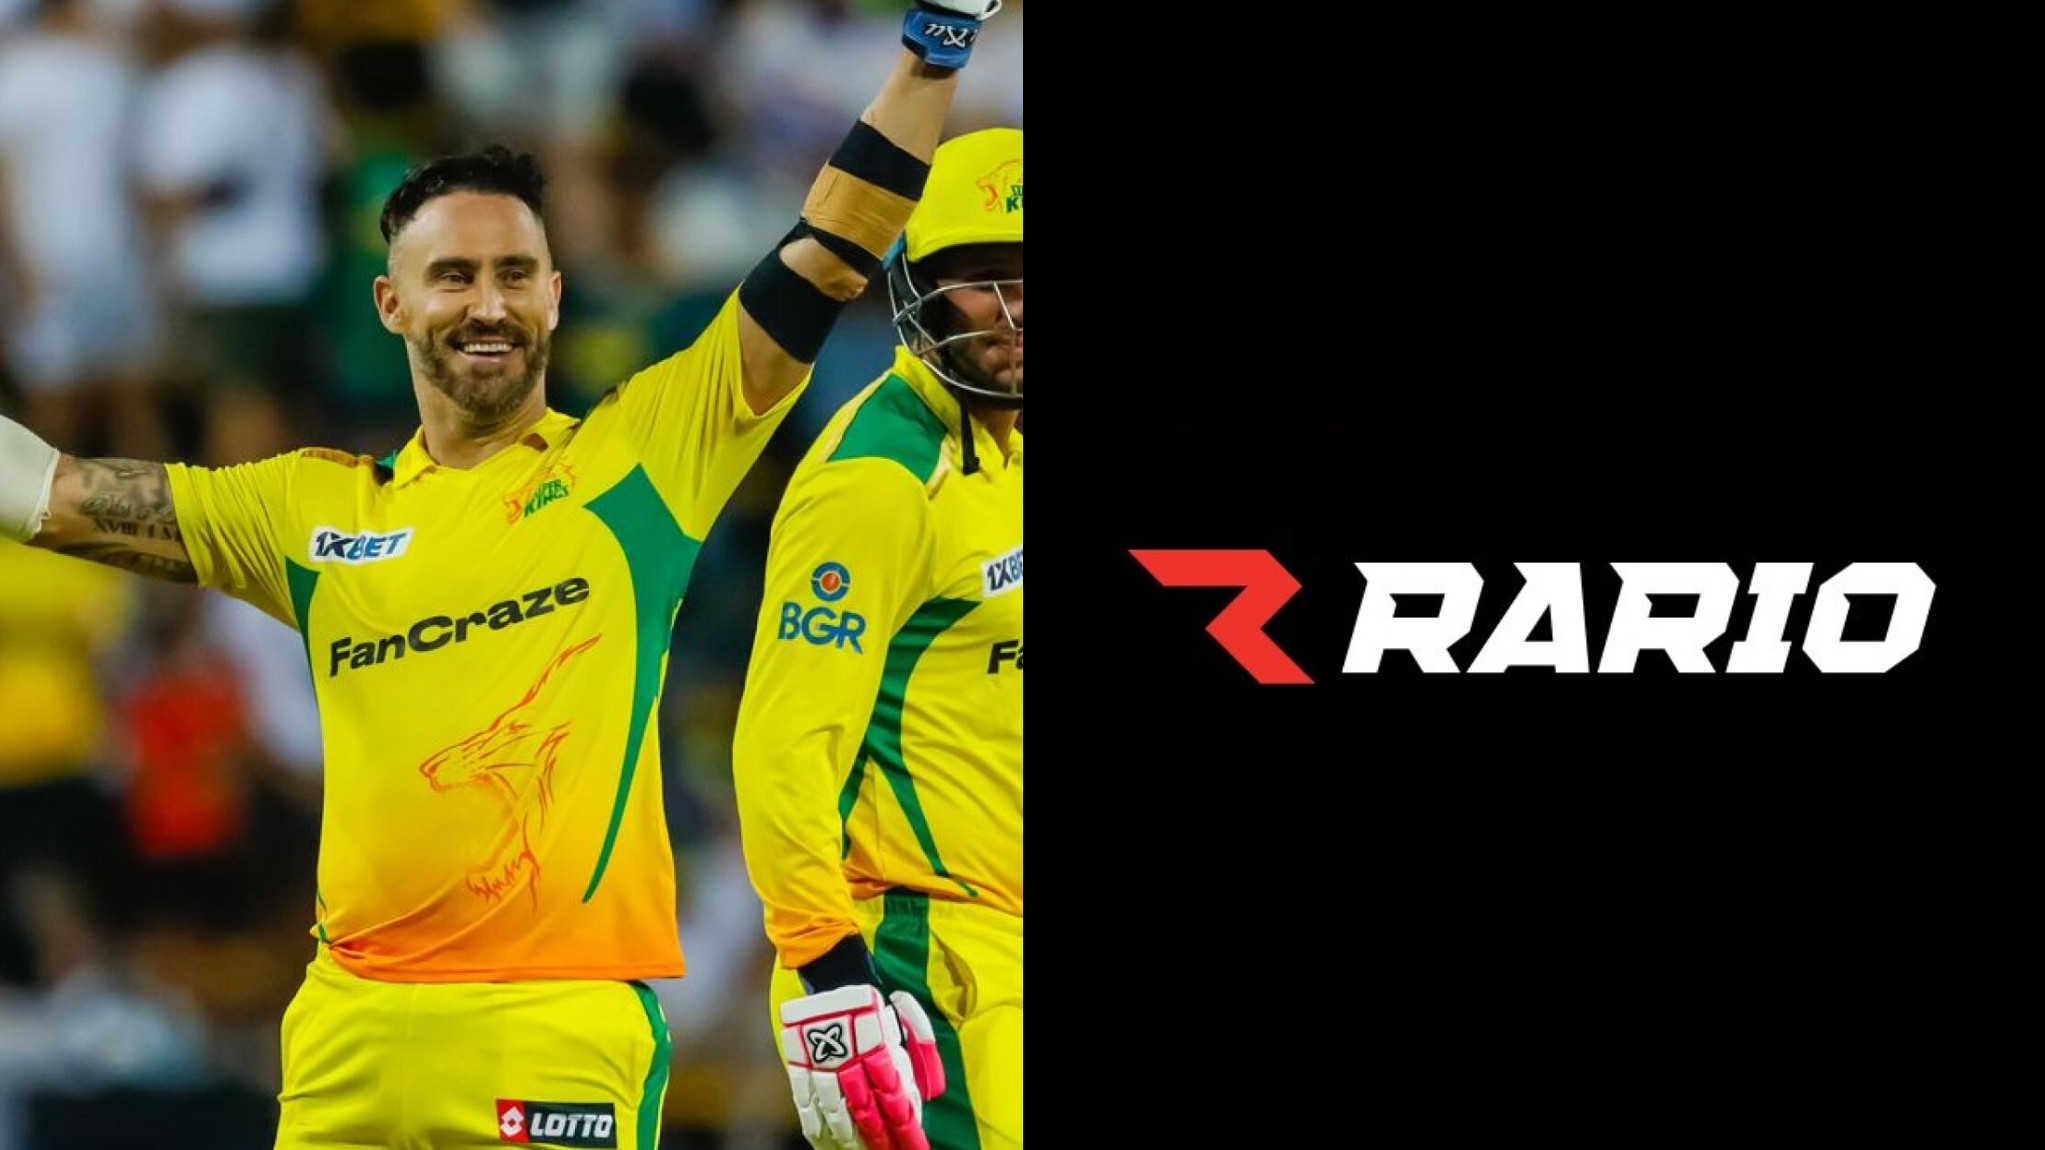 Rario D3 Predictions: Grab exciting player cards for RSA T20 League and get great prizes